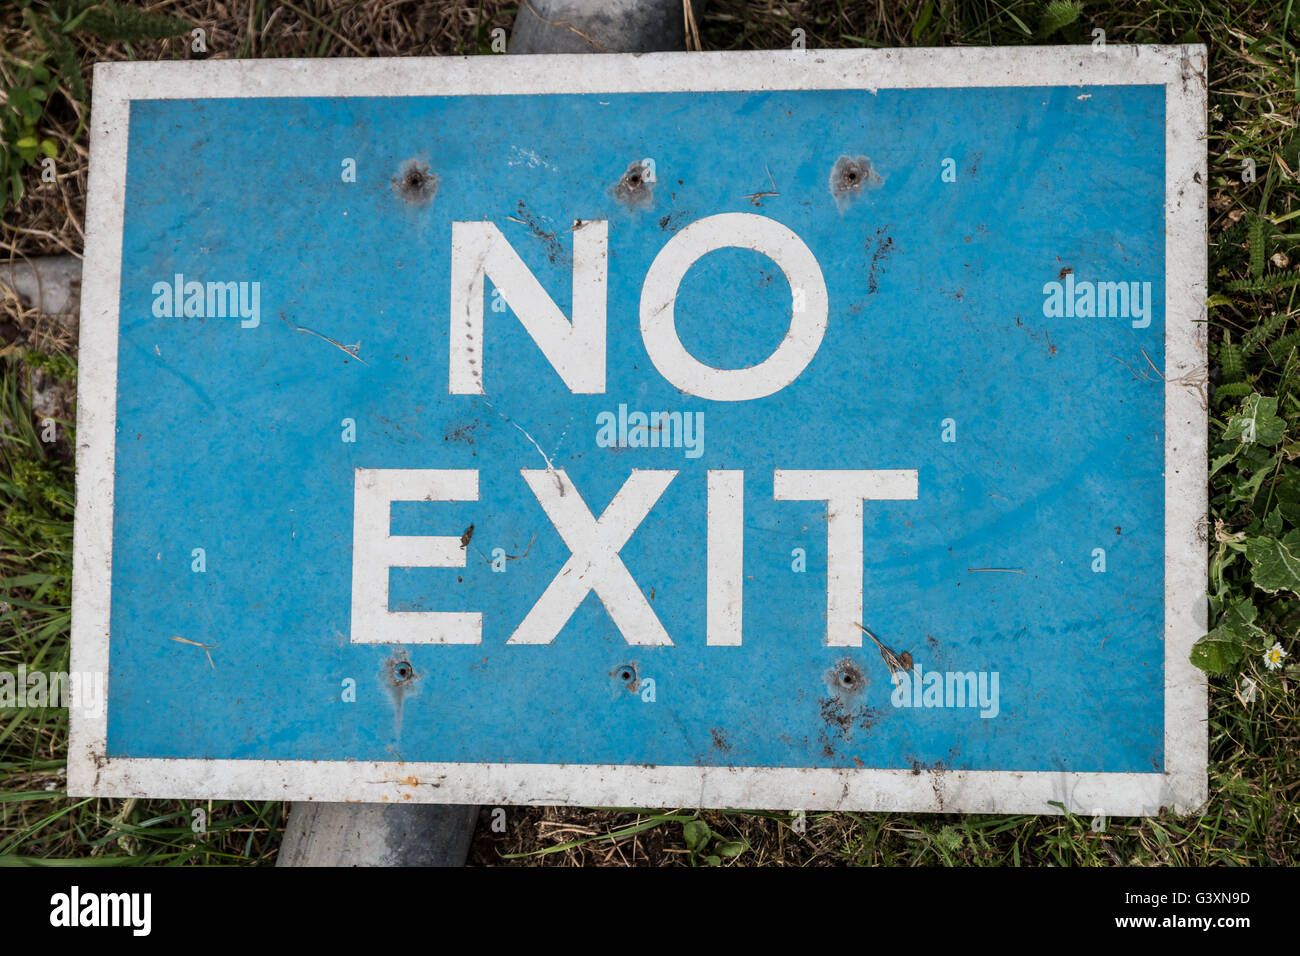 A broken 'No exit' sign lying on some grass. Stock Photo